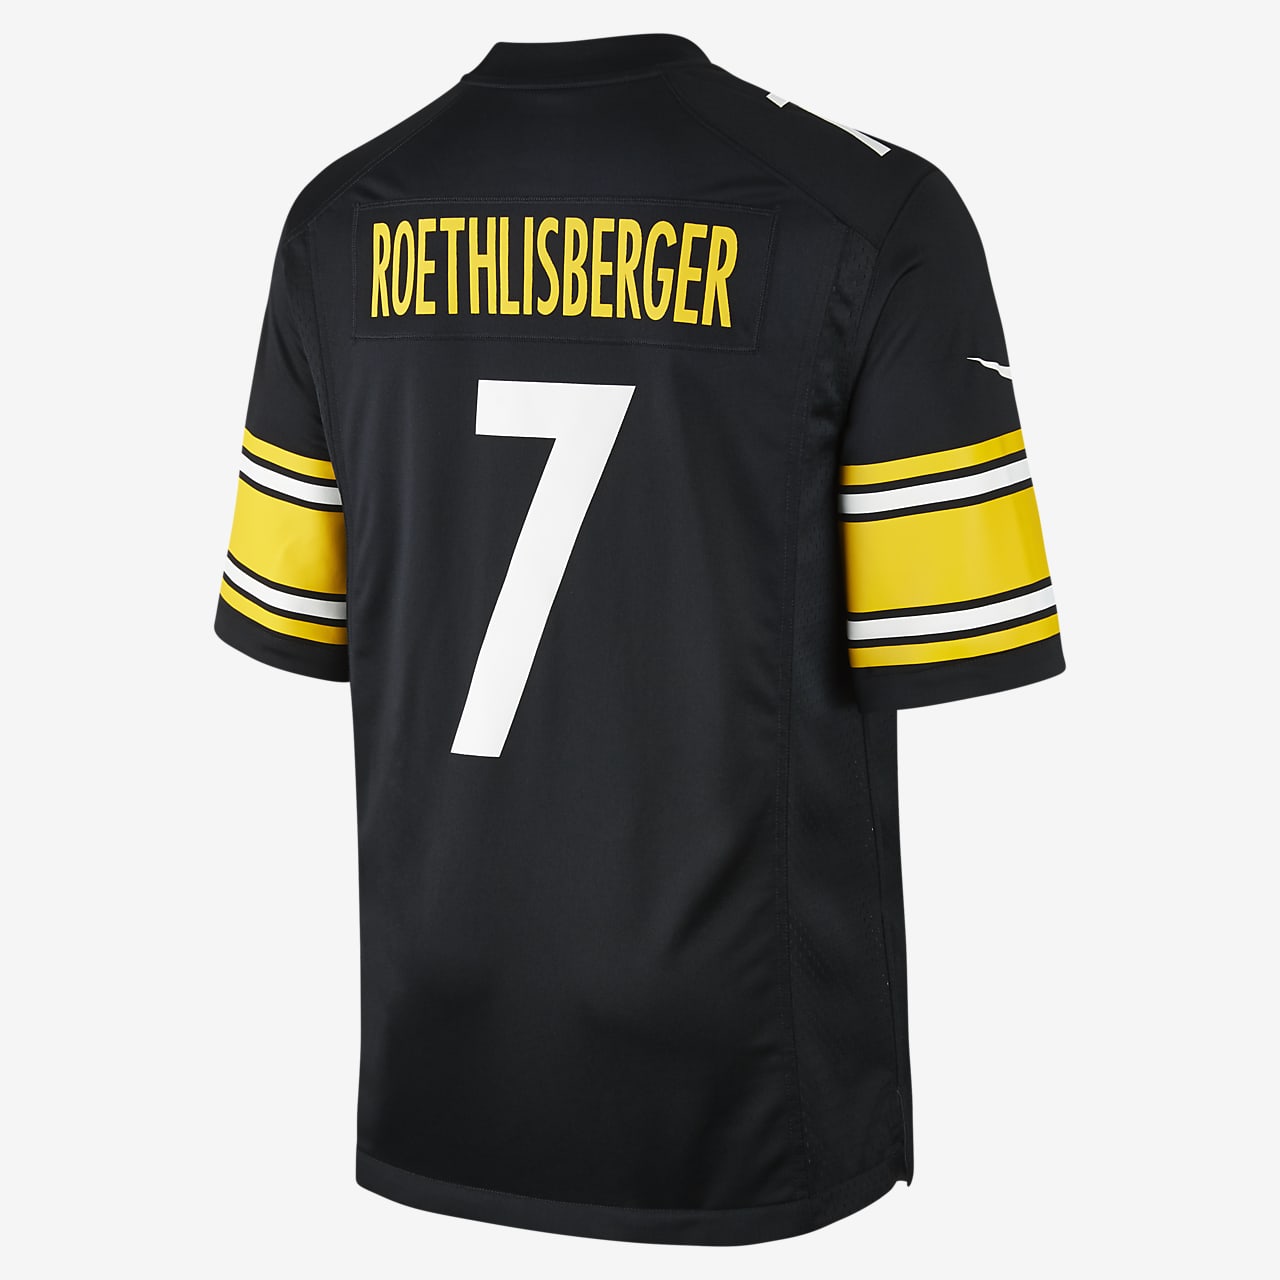 pittsburgh steelers jersey shirts